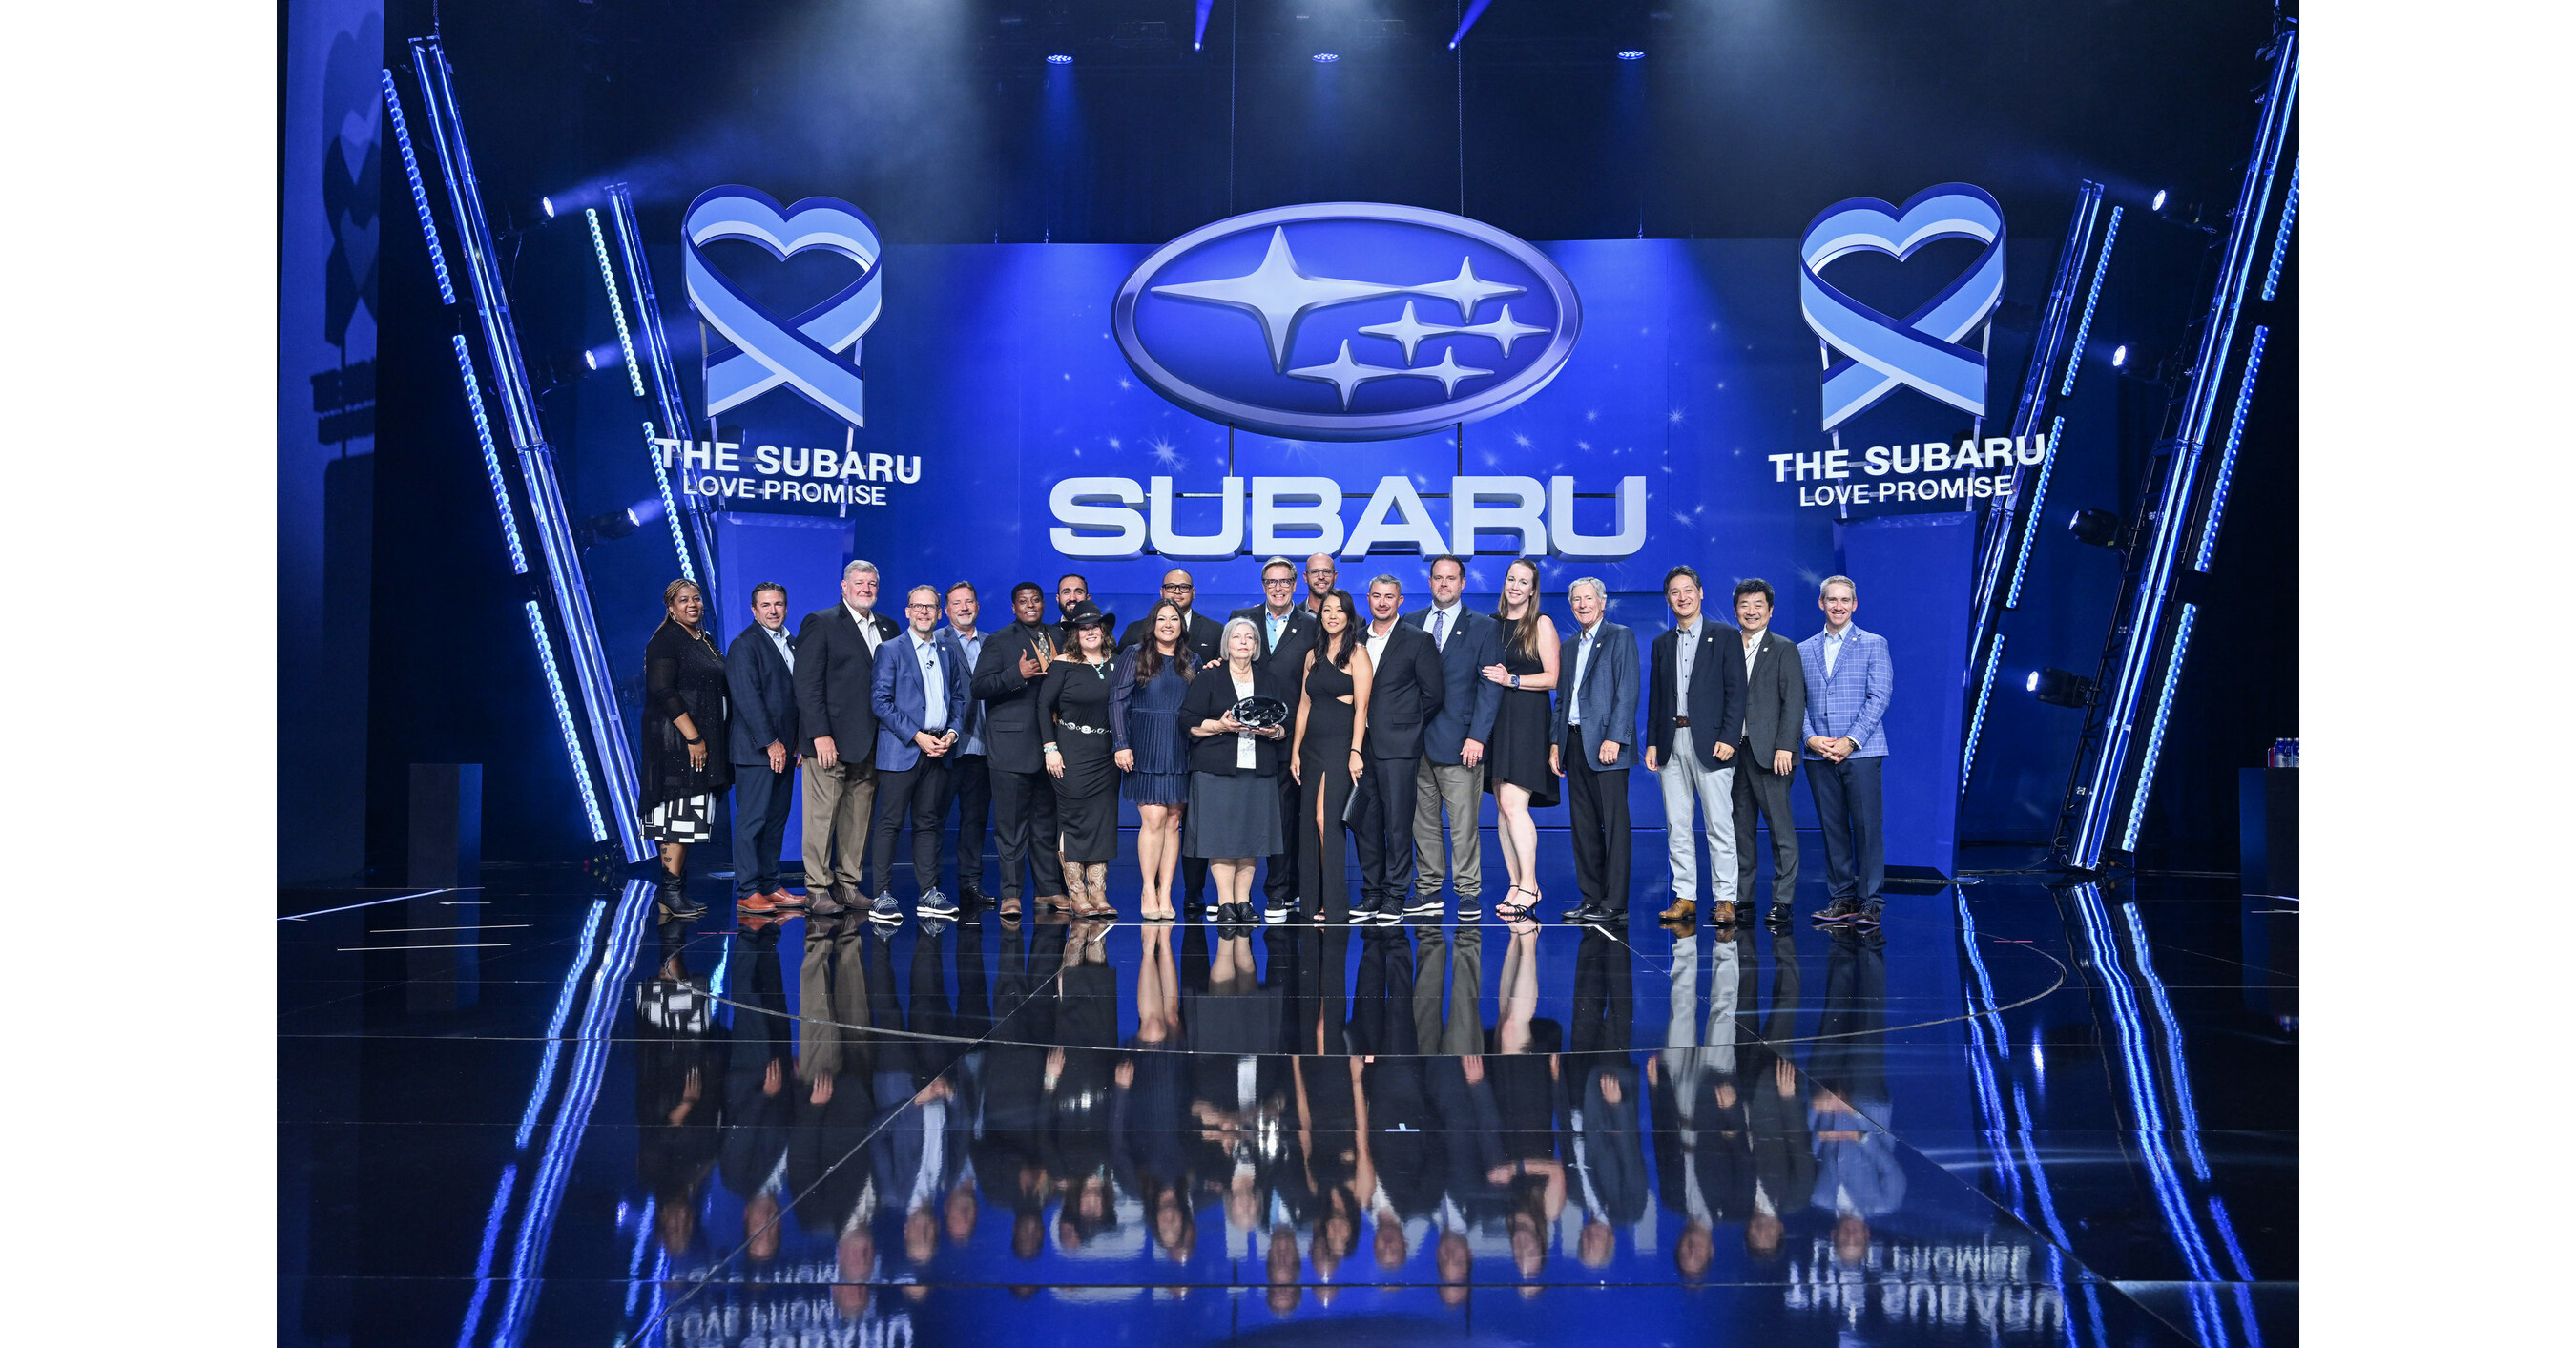 FINDLAY SUBARU OF LAS VEGAS RECEIVES THE SUBARU LOVE PROMISE RETAILER OF  THE YEAR AWARD HONORING COMMITMENT TO CUSTOMERS AND LOCAL COMMUNITY